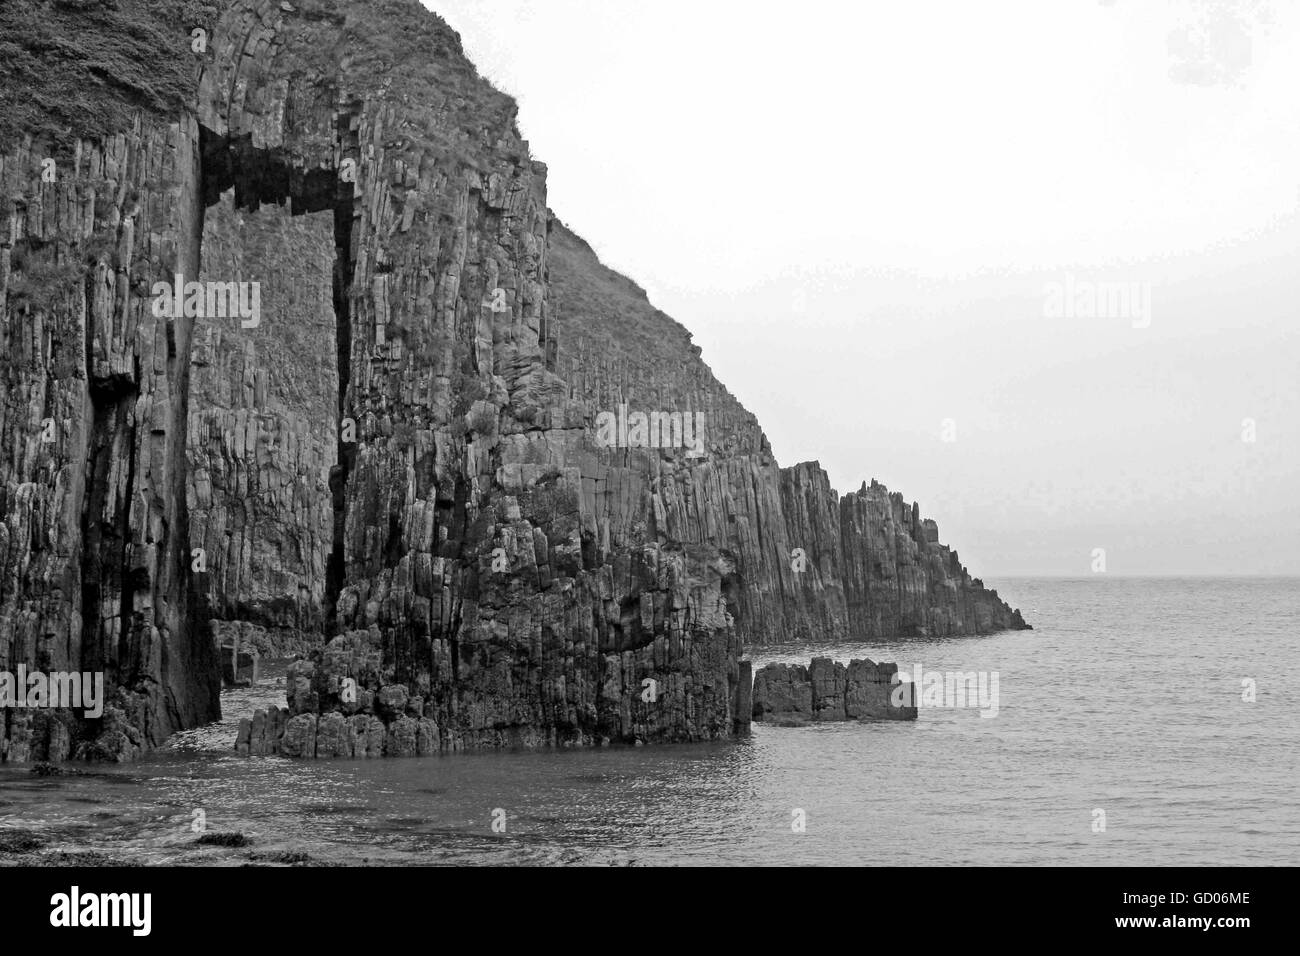 Cliffs in Black and White Stock Photo